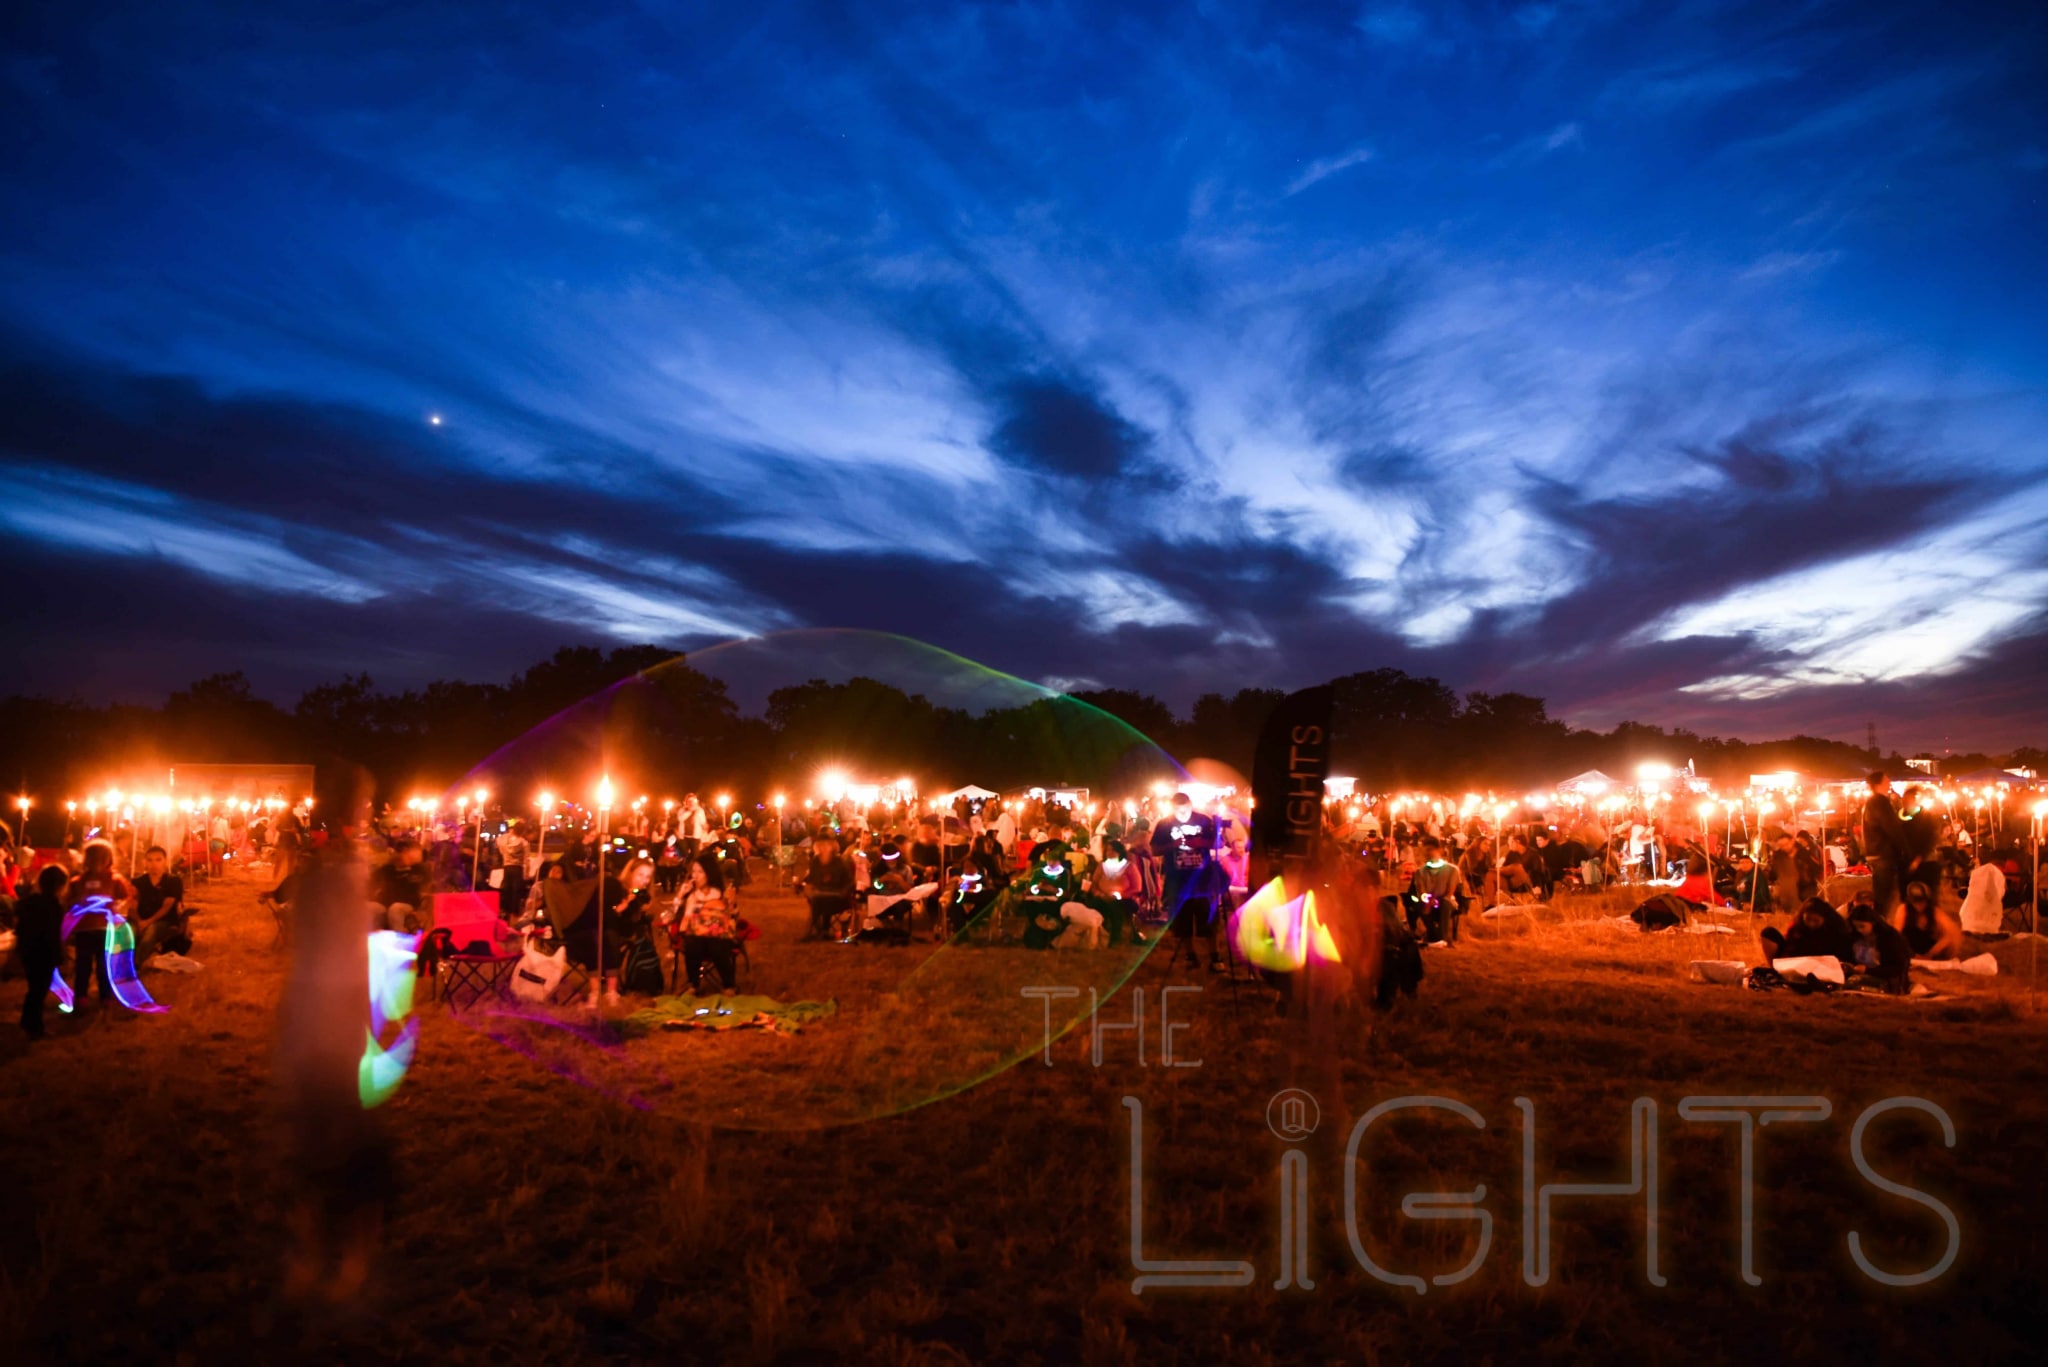 Tiki torches light the grounds as festival goers wait for nightfall. (Photo via The Lights Fest)